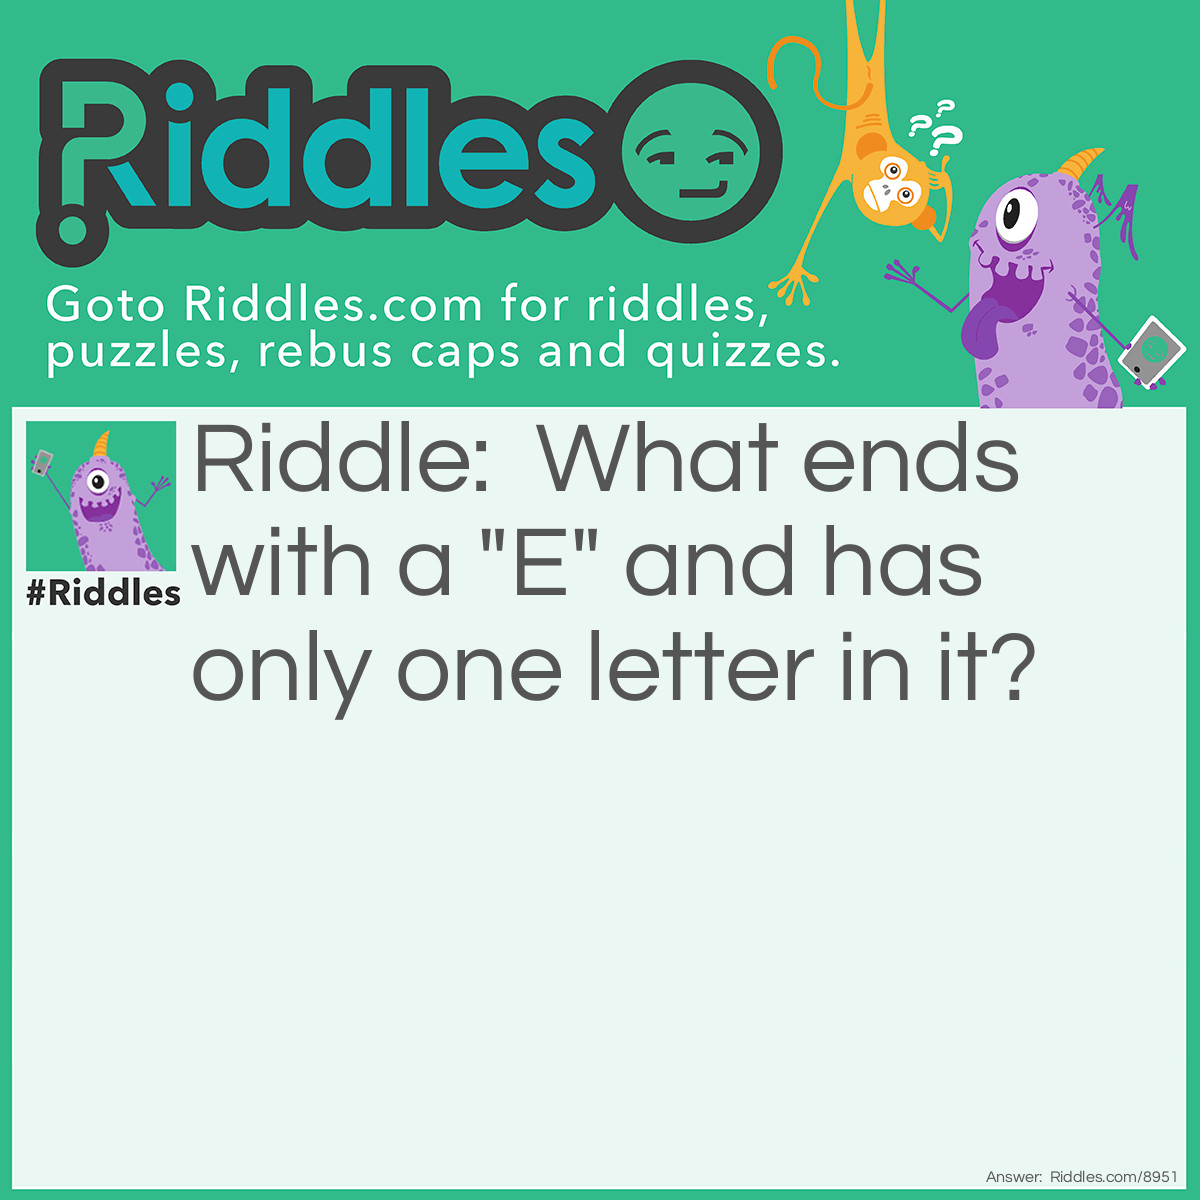 Riddle: What ends with a "E" and has only one letter in it? Answer: An envelope.